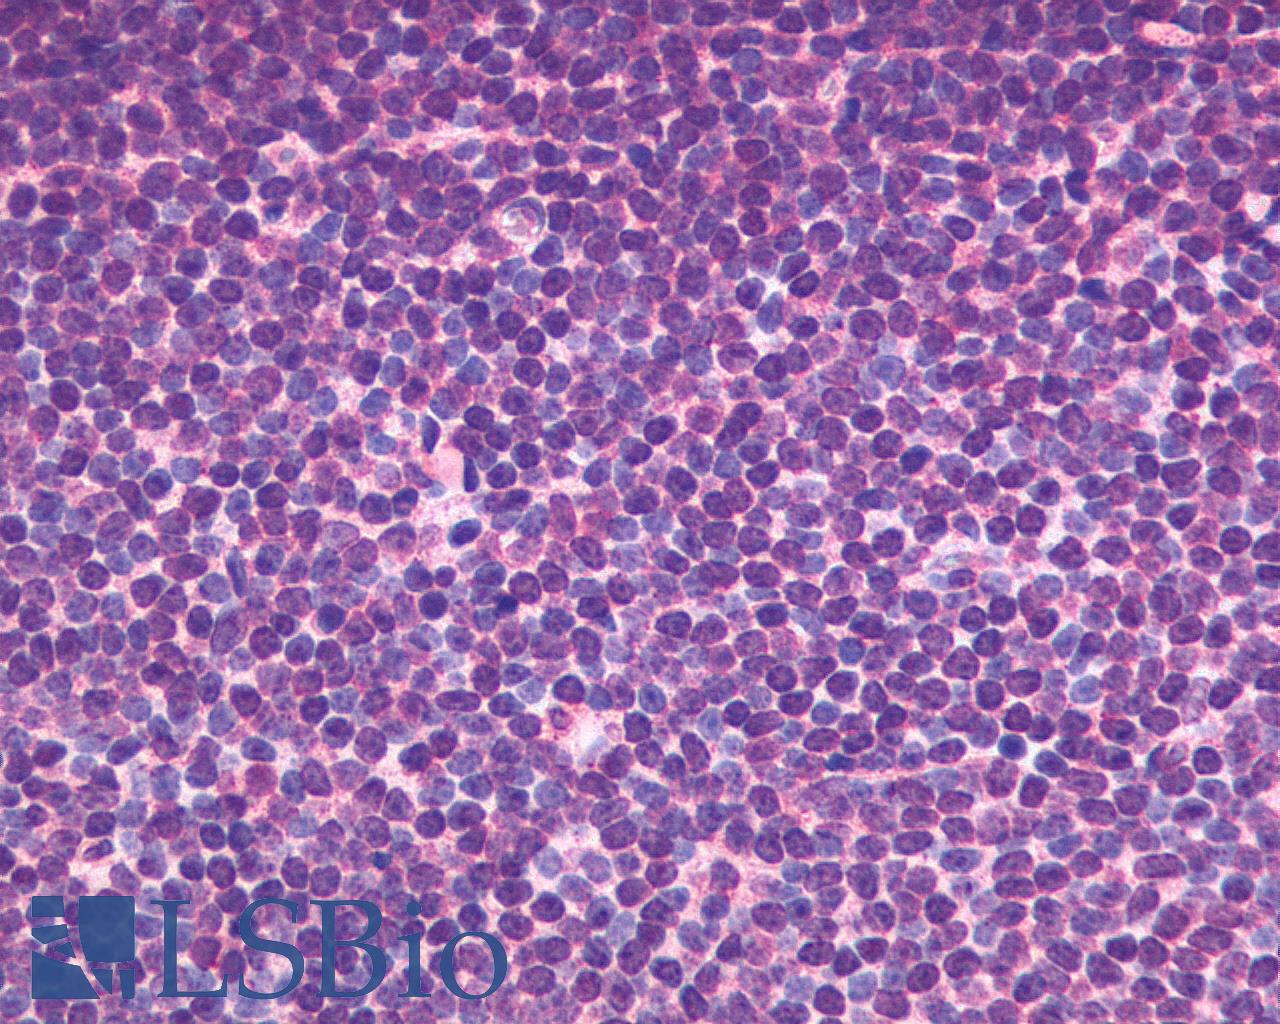 CXCR5 Antibody - Anti-CXCR5 antibody IHC of human Lymph Node, B-Cell, Mantle Cell Lymphoma. Immunohistochemistry of formalin-fixed, paraffin-embedded tissue after heat-induced antigen retrieval.